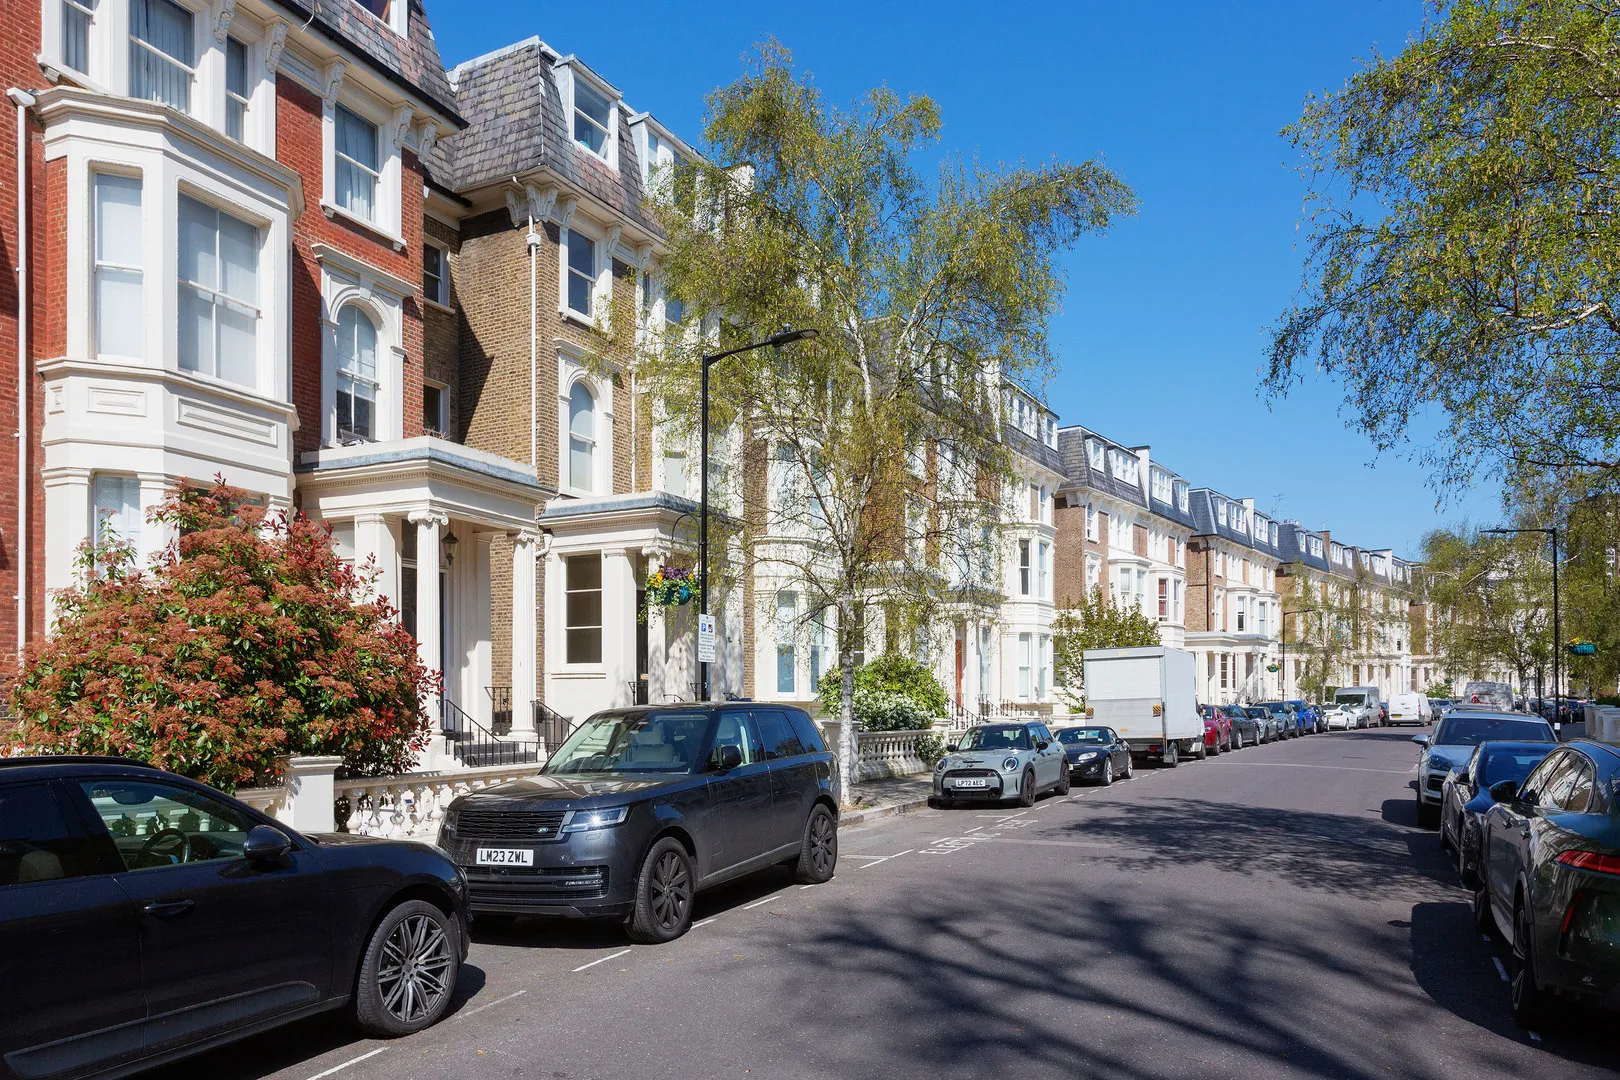 Randolph Crescent, holiday home in Maida Vale, London